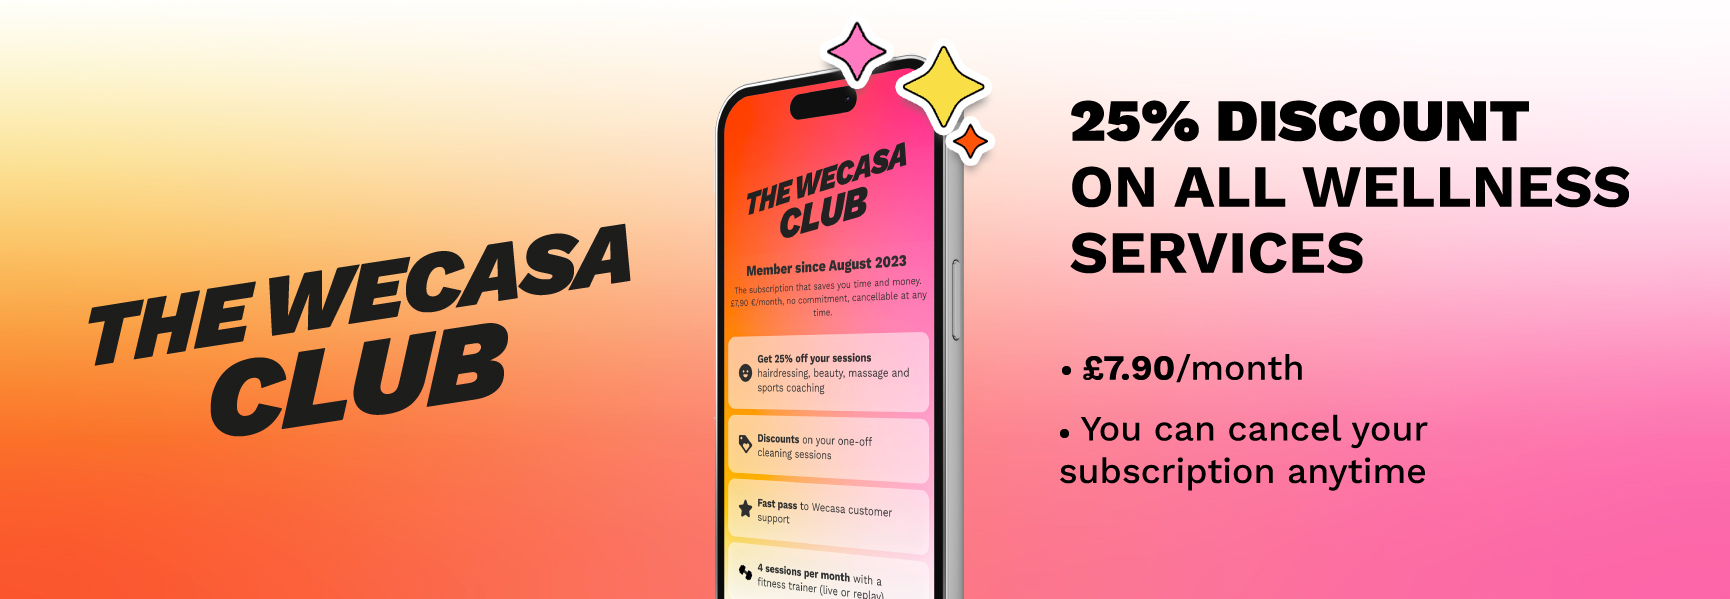 Join the Wecasa Club